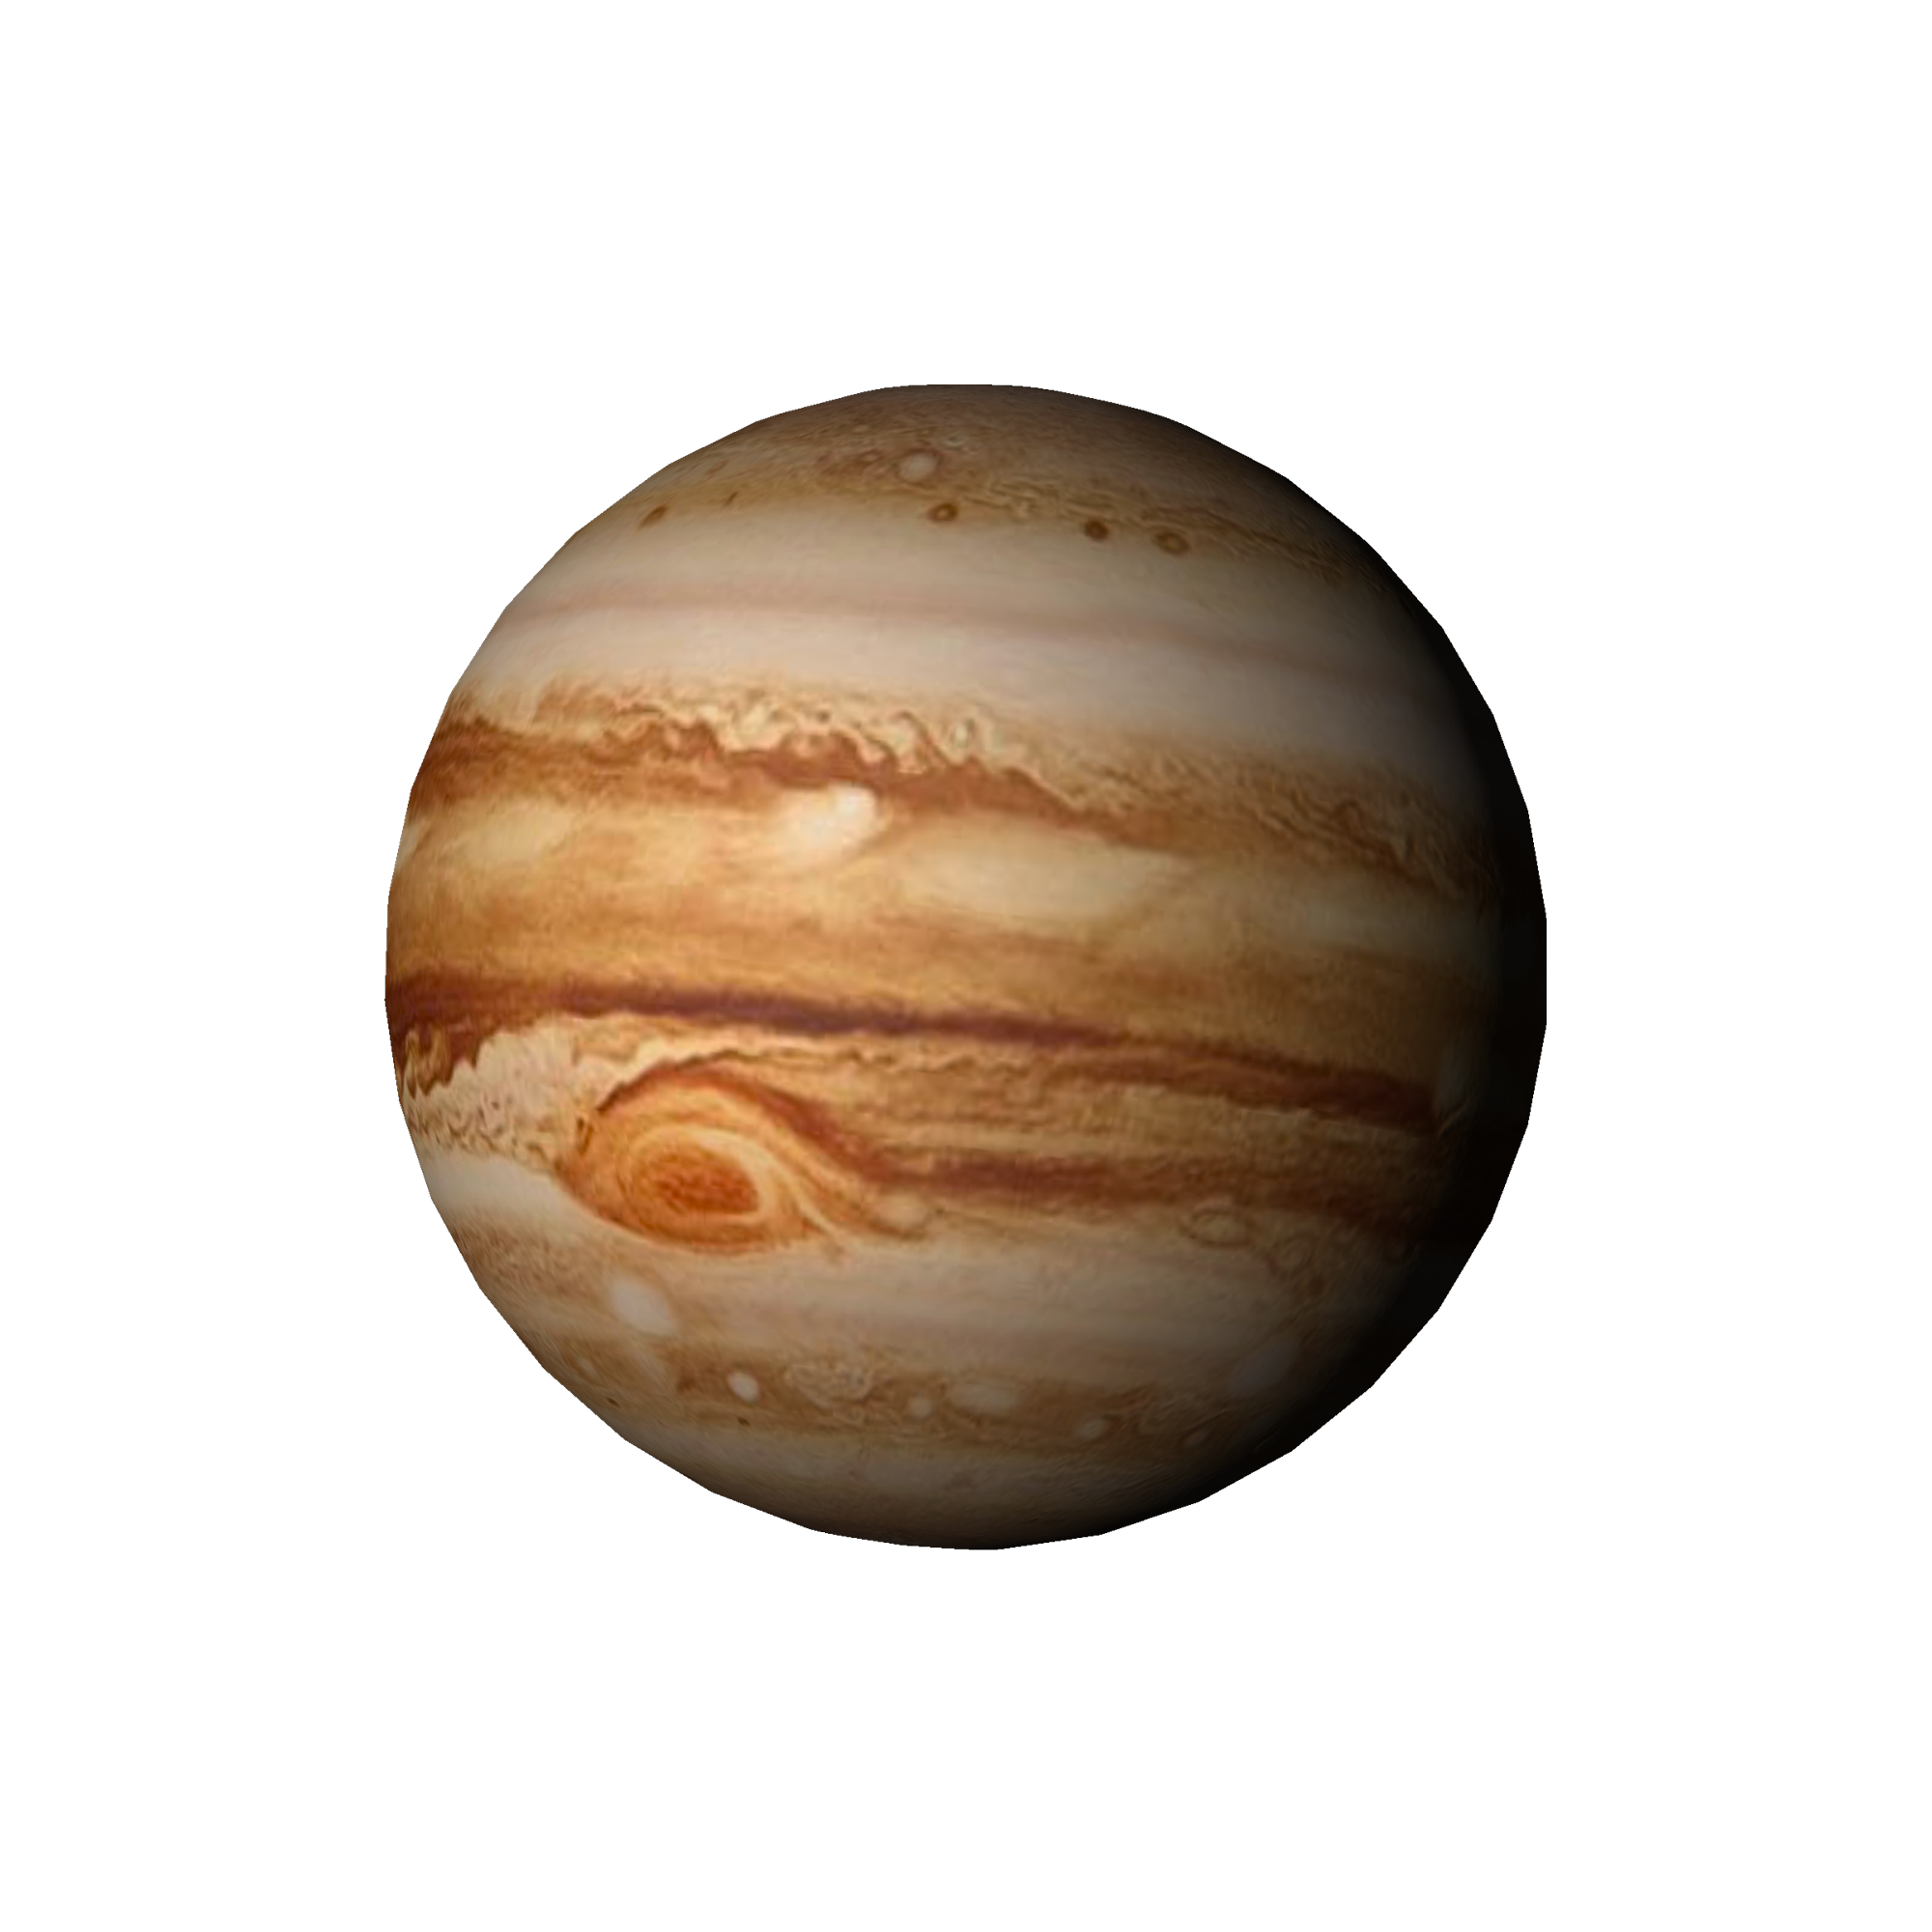 Hubble · planet Jupiter with